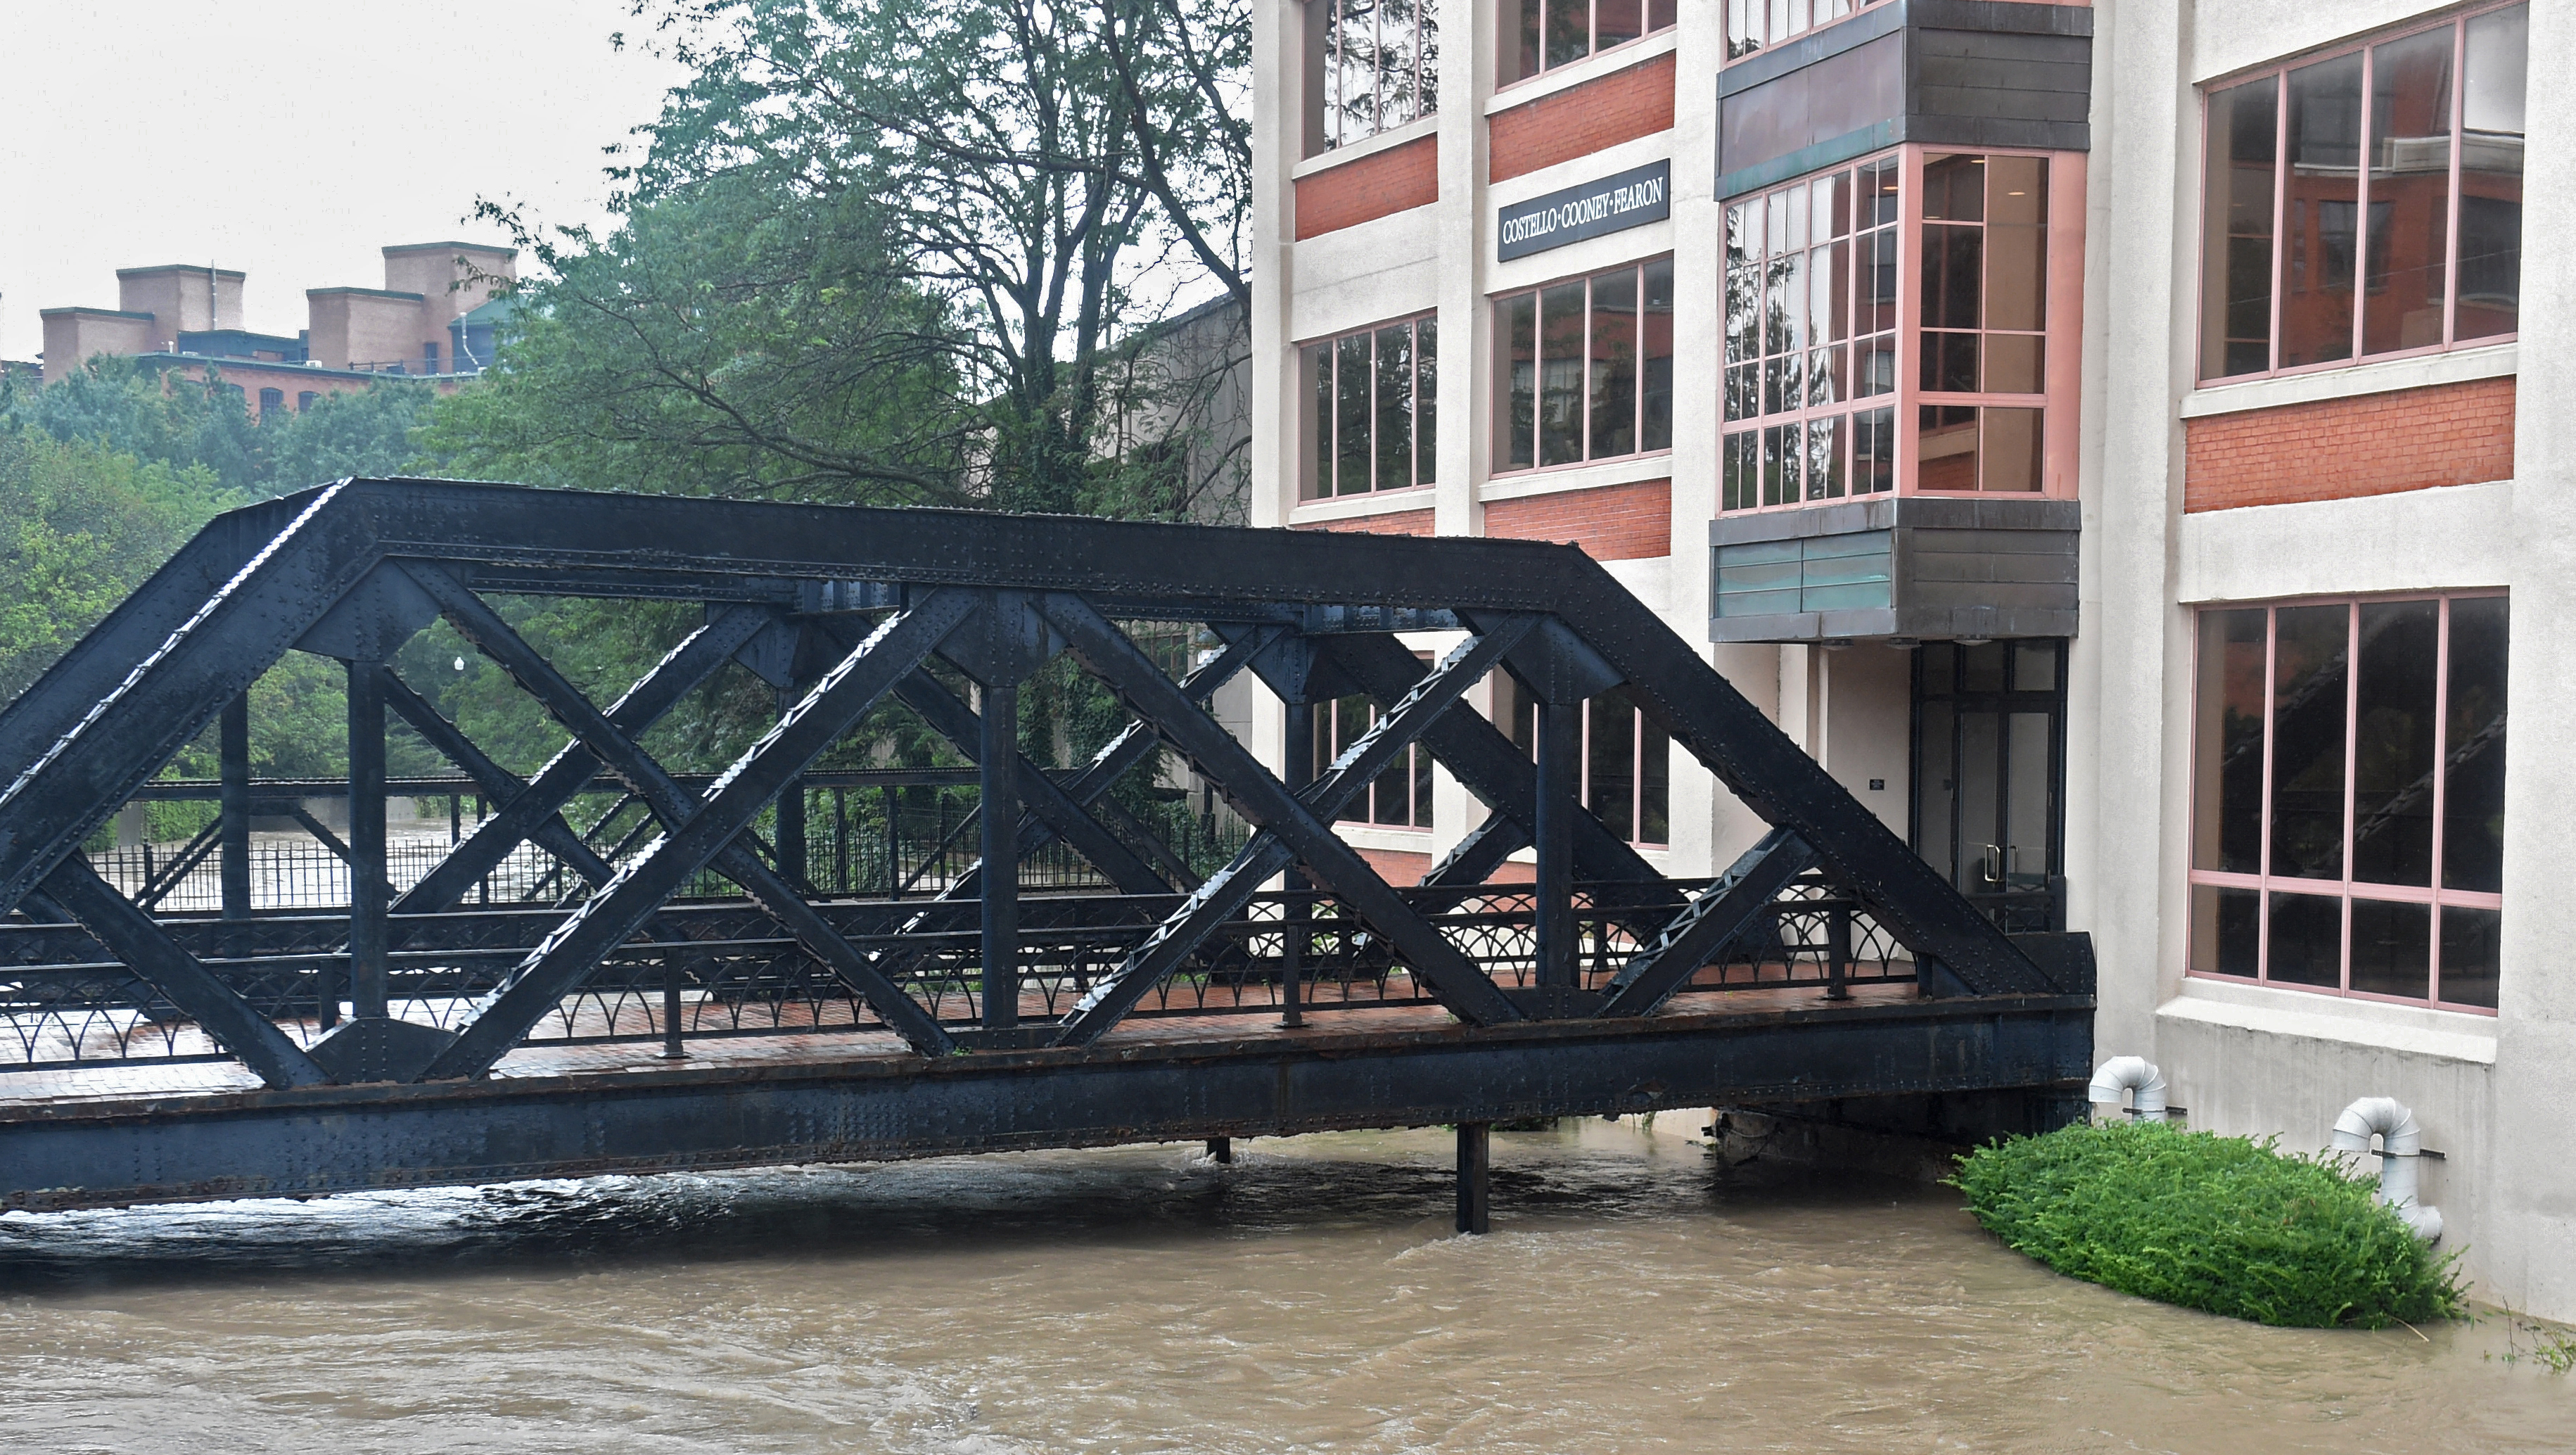 Heavy rains again caused flooding in Central New York August 19, 2021. High waters in Onondaga Creek flow under the bridge in Franklin Square, nearly touching the bottom.